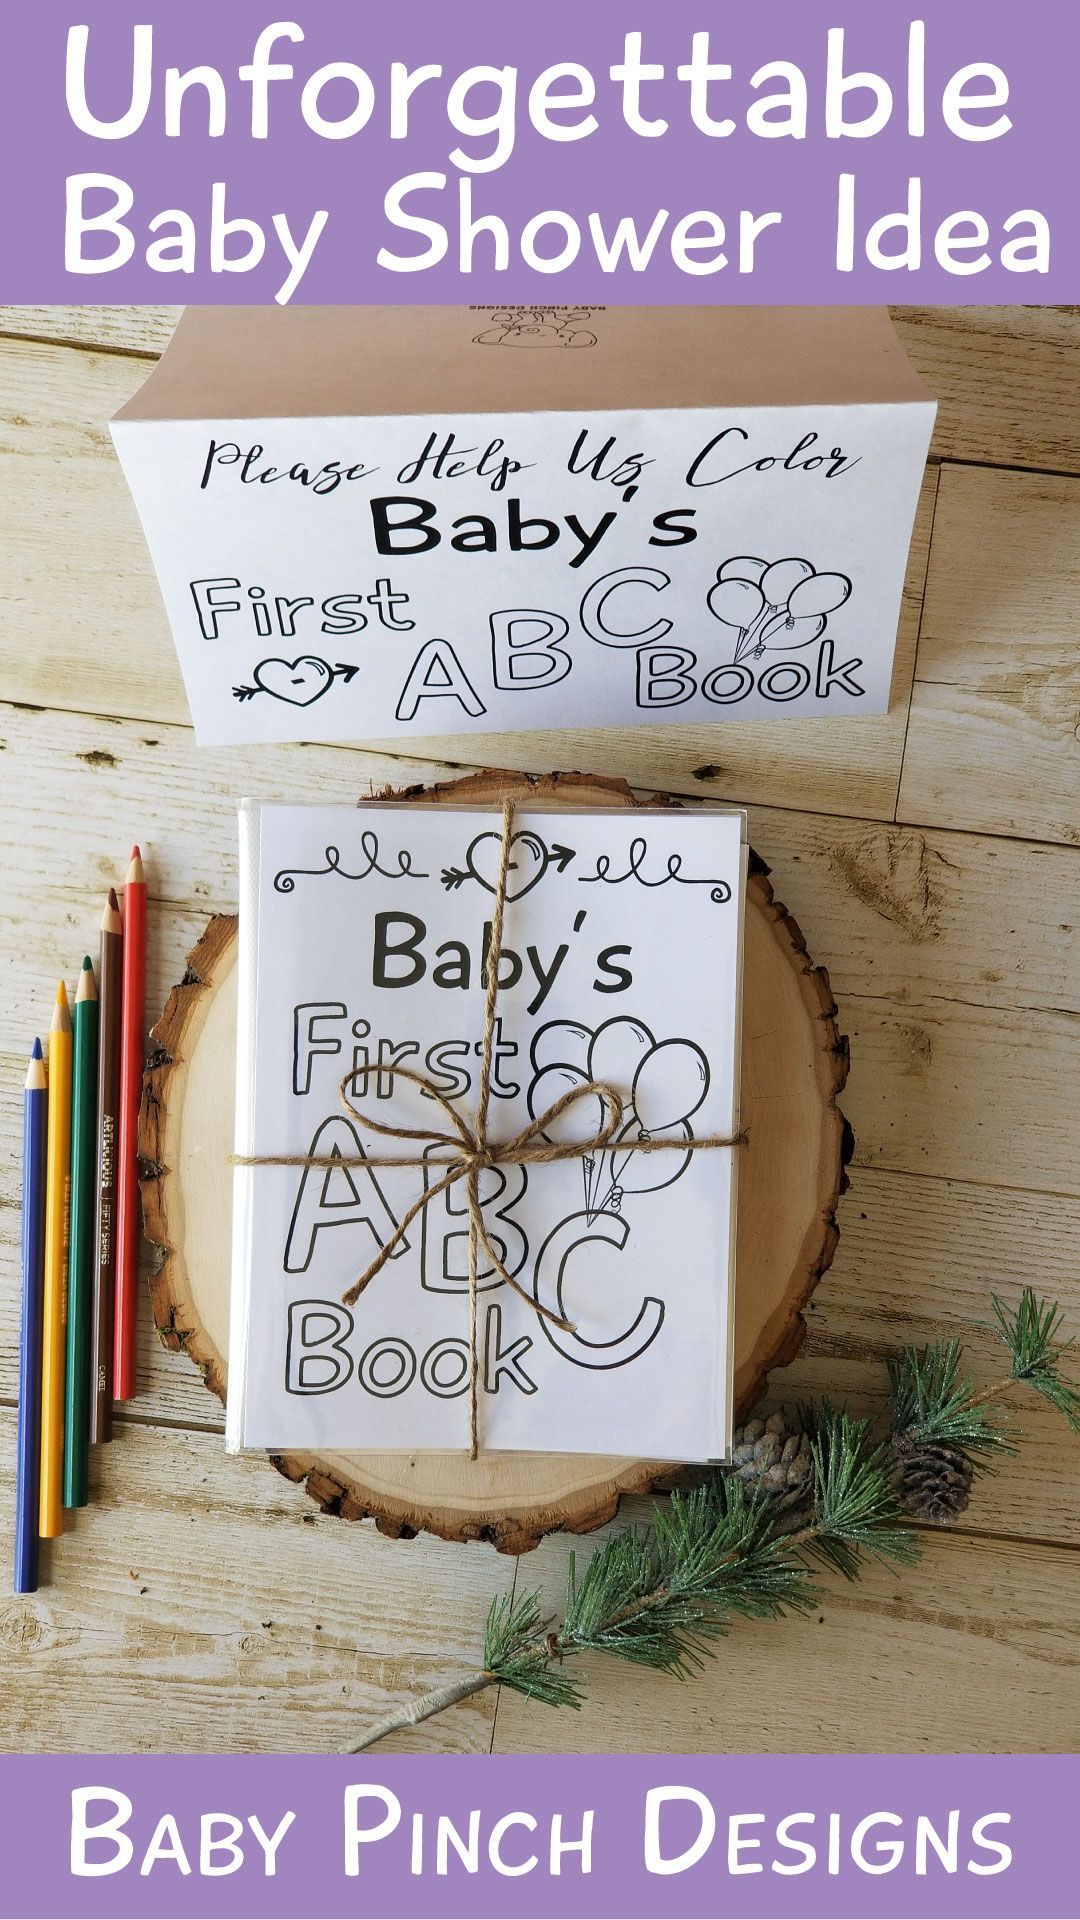 17 diy projects For Mom baby shower ideas